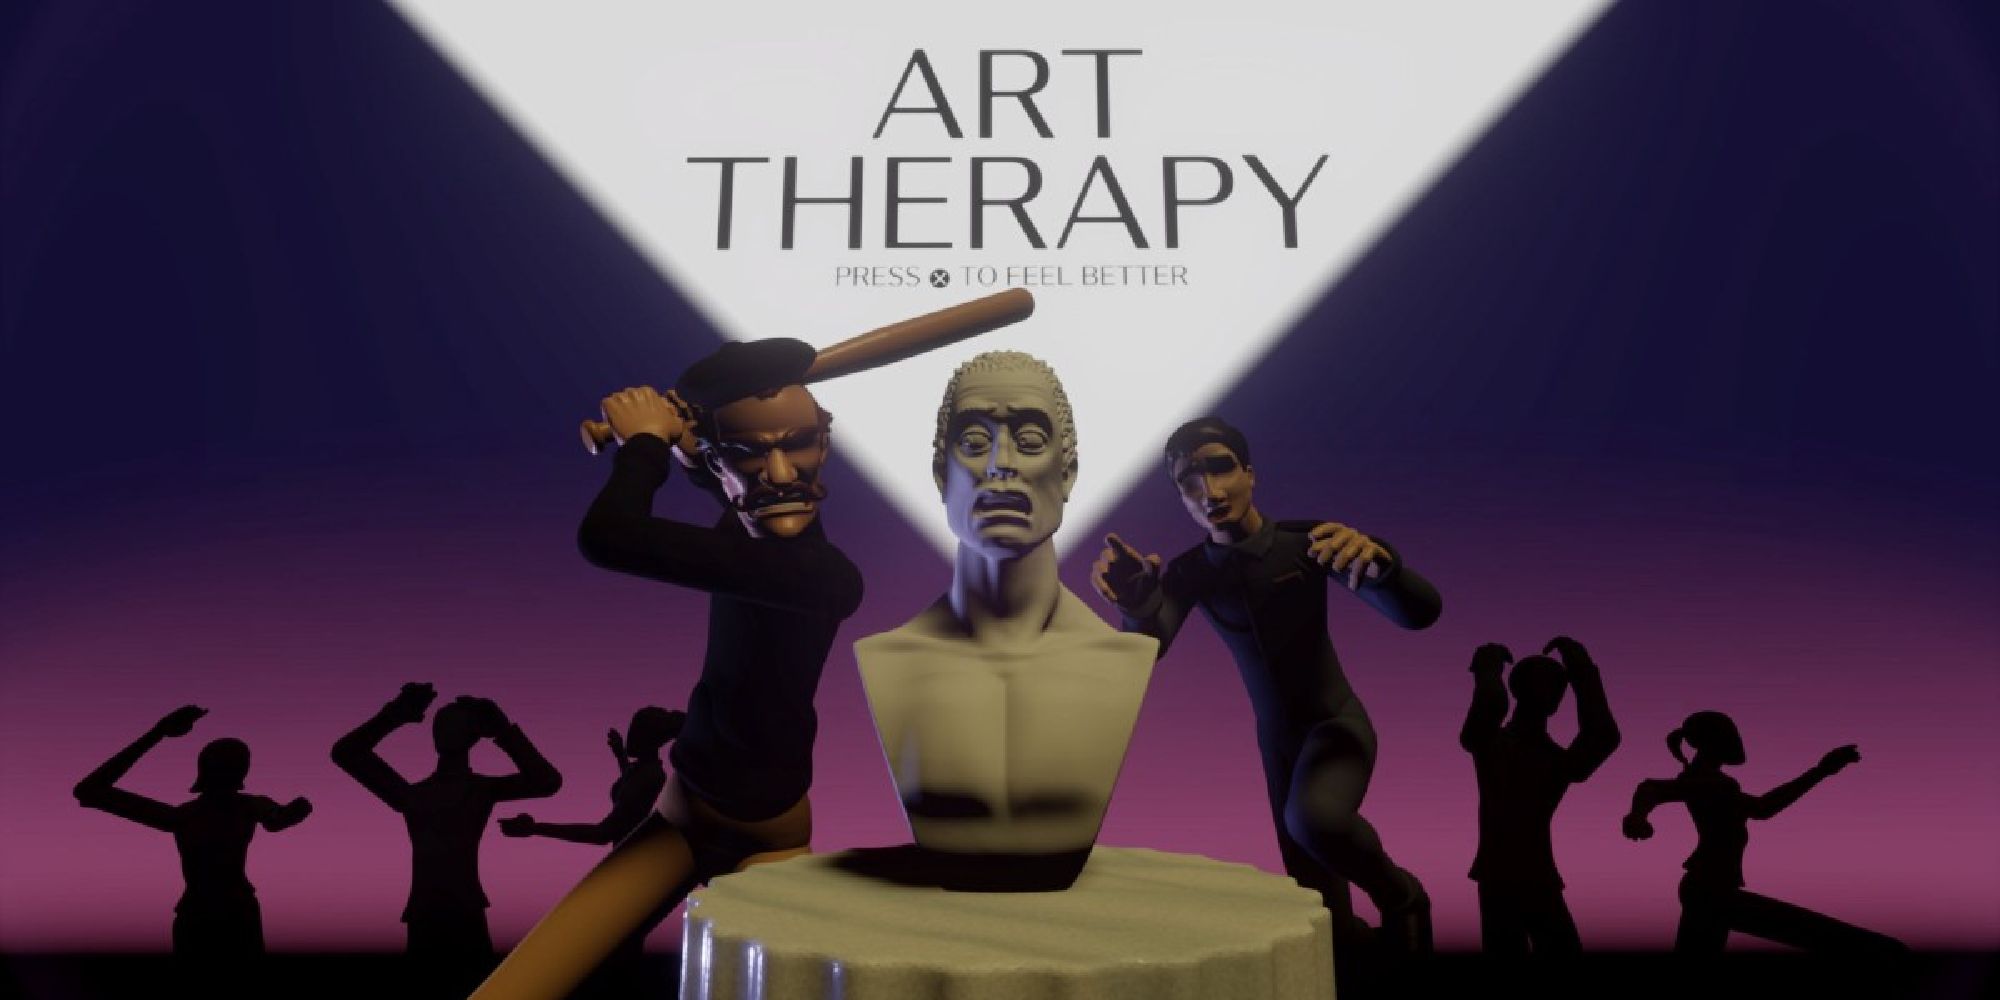 Cover art for the game, that shows two people in all black about to destroy a bust.